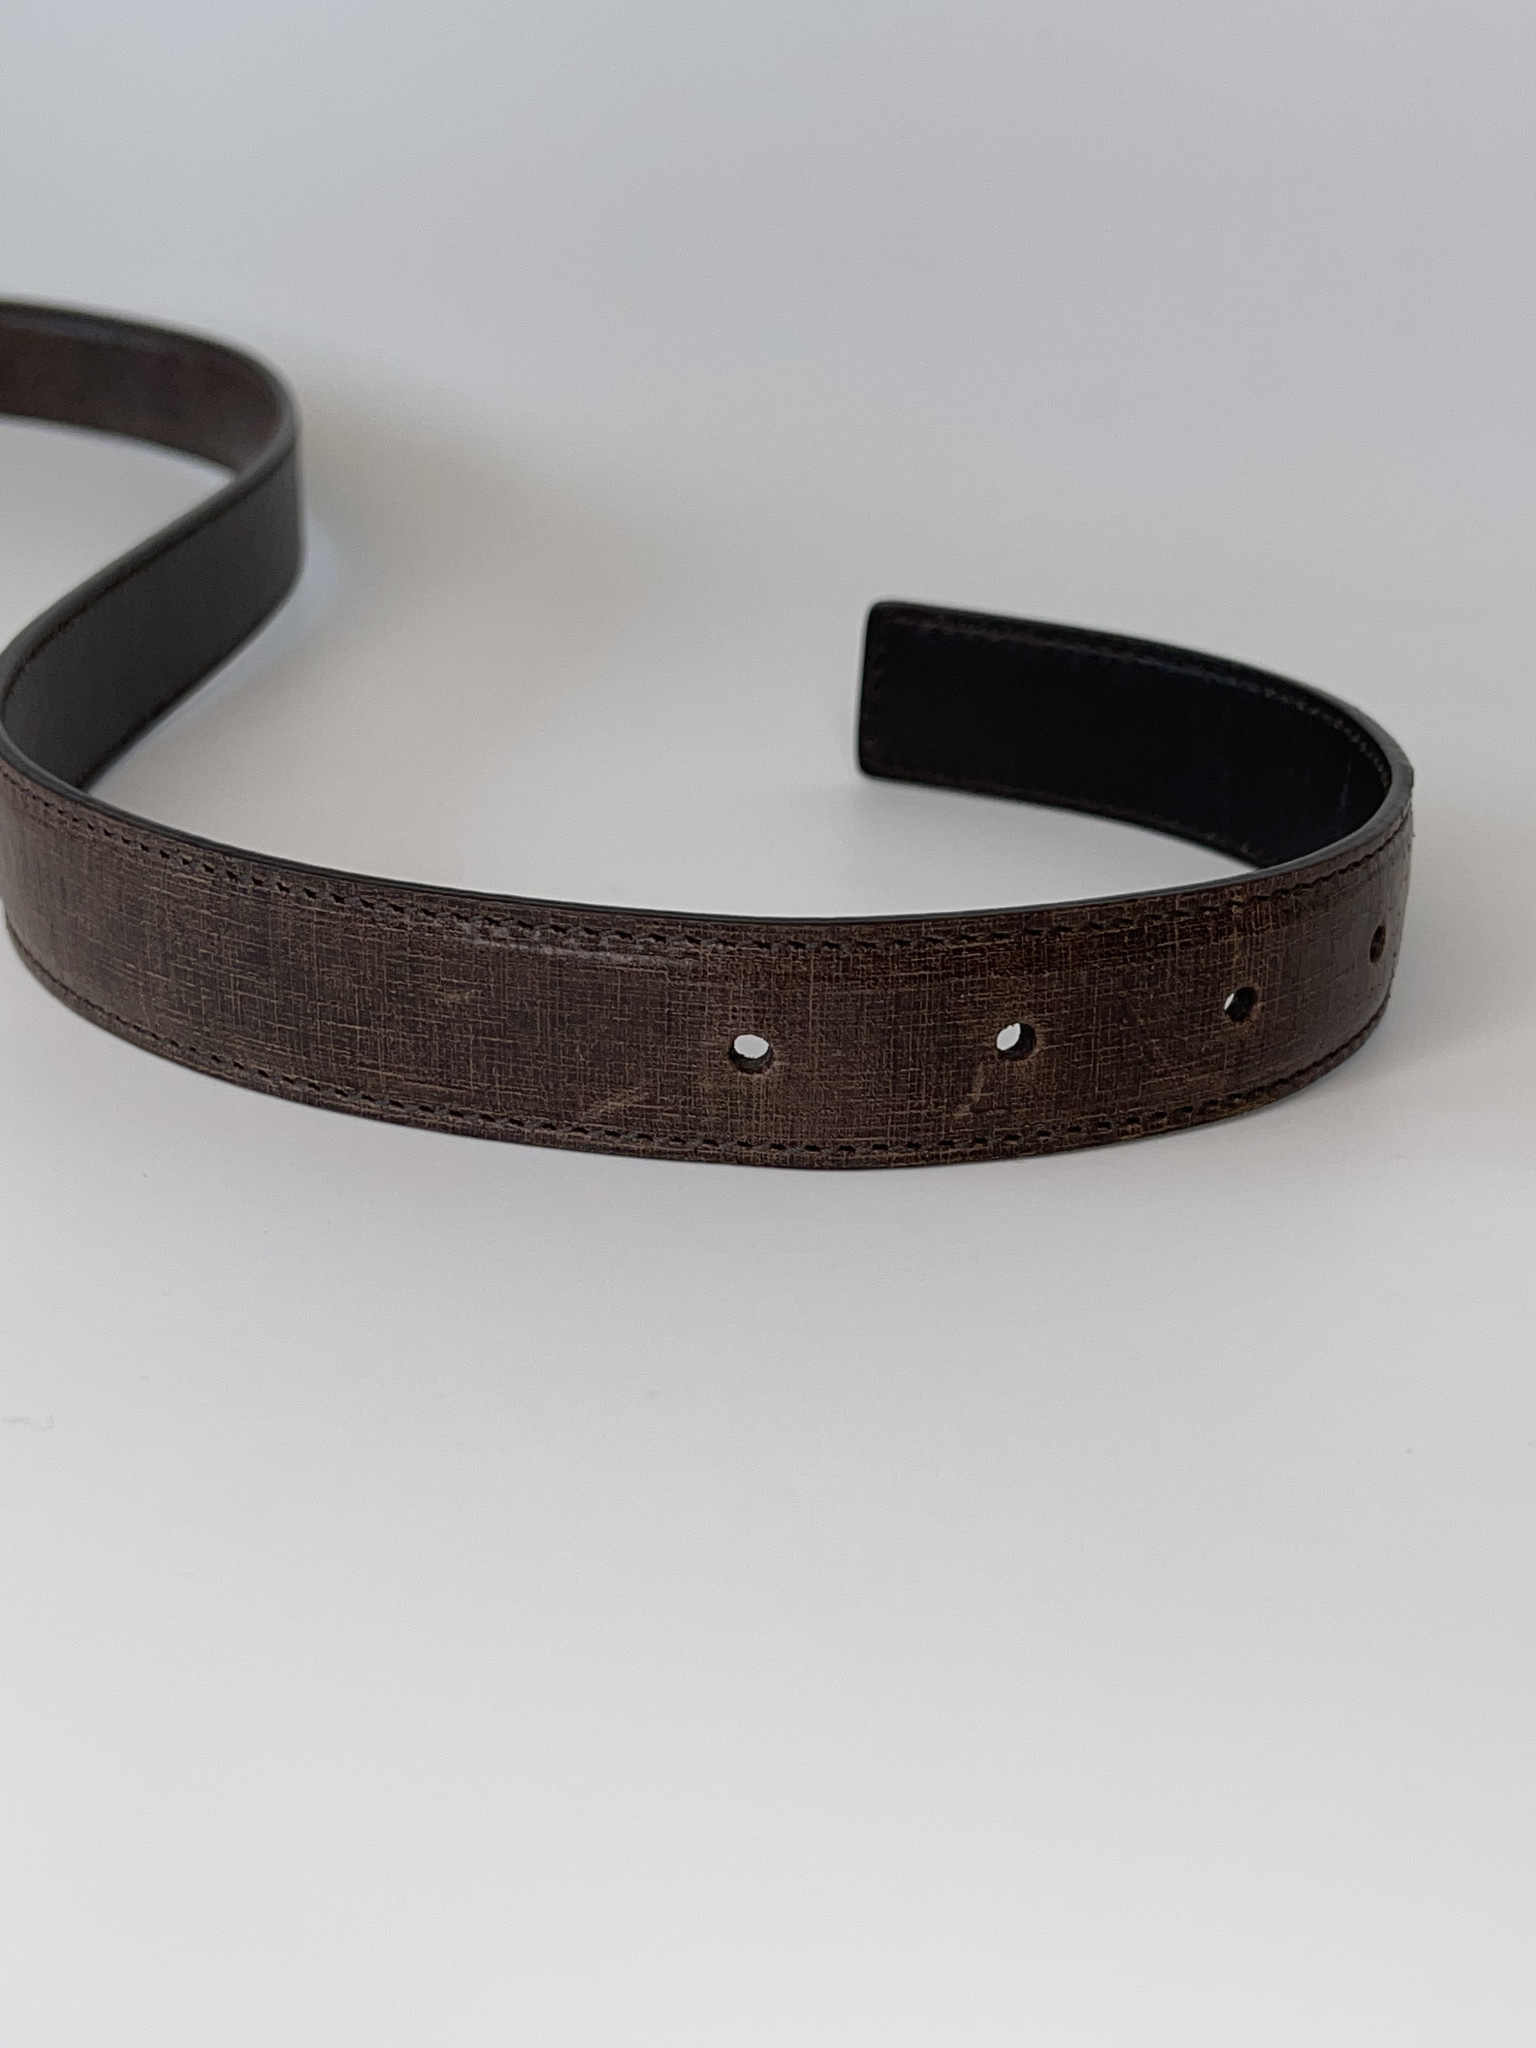 Leather belt Yves Saint Laurent Brown size 95 cm in Leather - 34614826